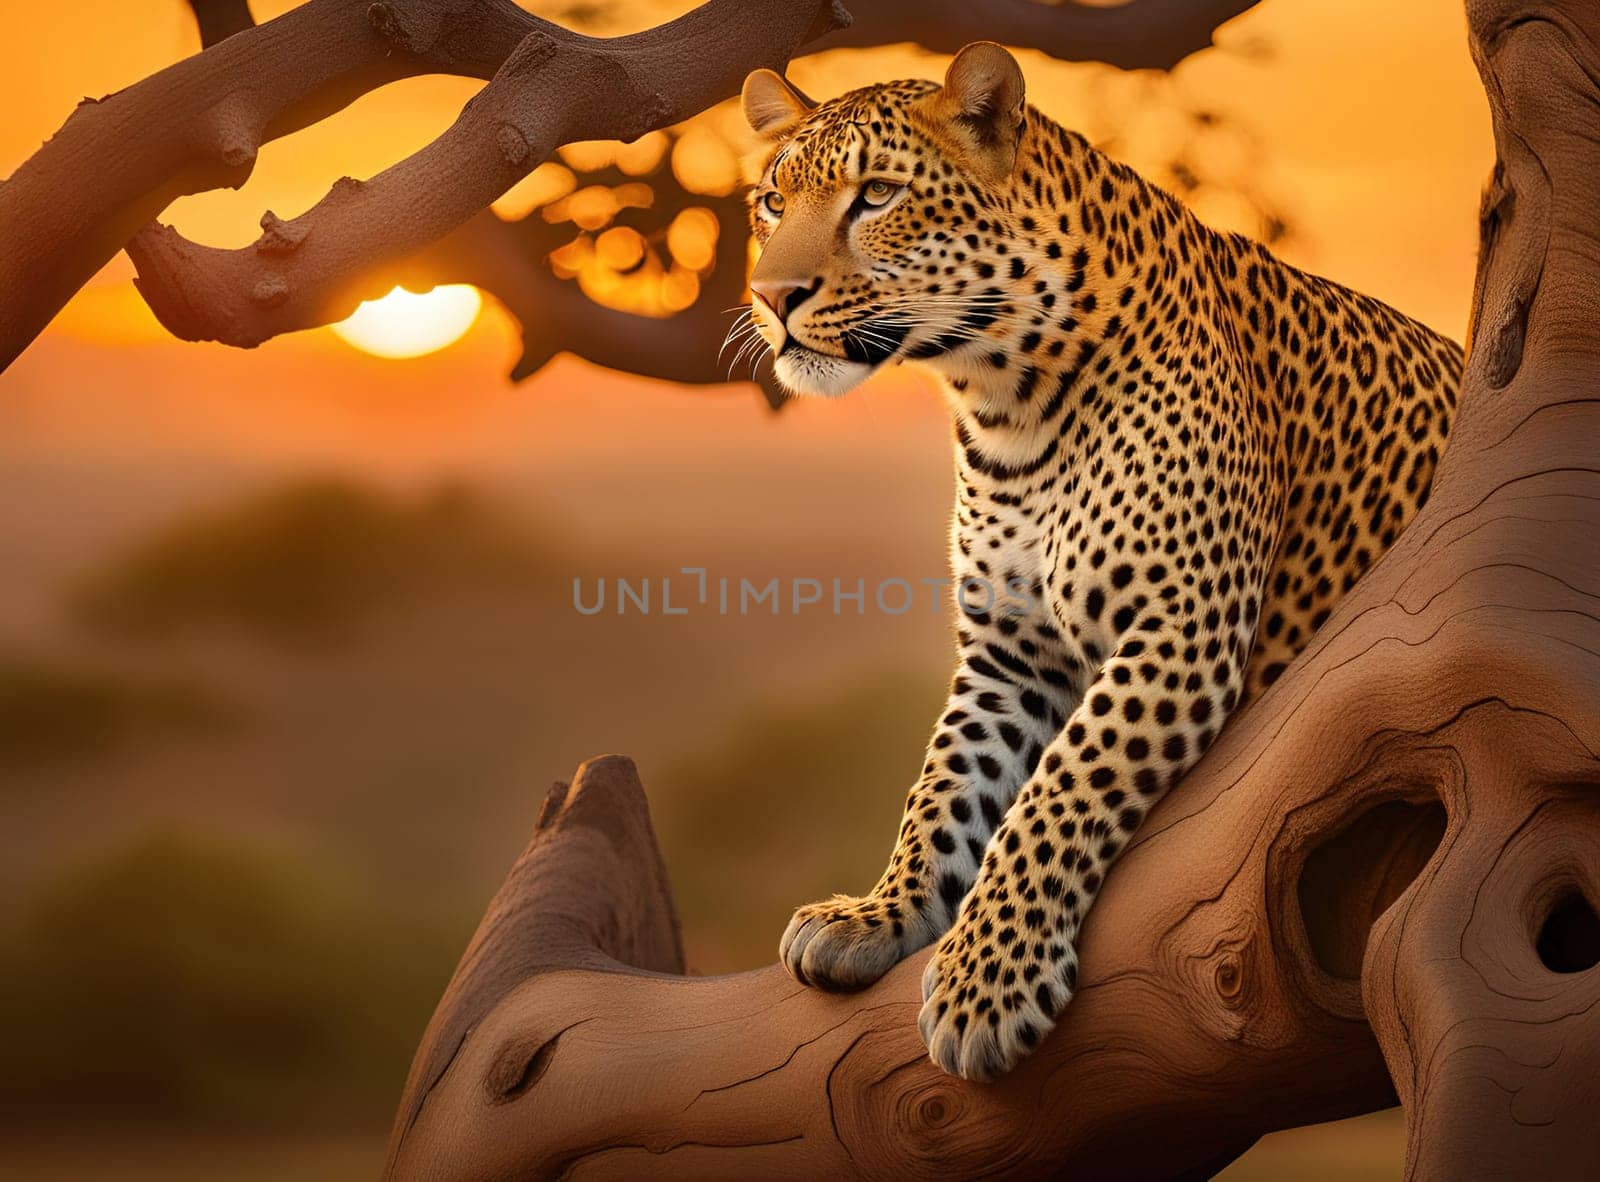 Leopard resting on a tree branch at sunset in the African savannah by yilmazsavaskandag